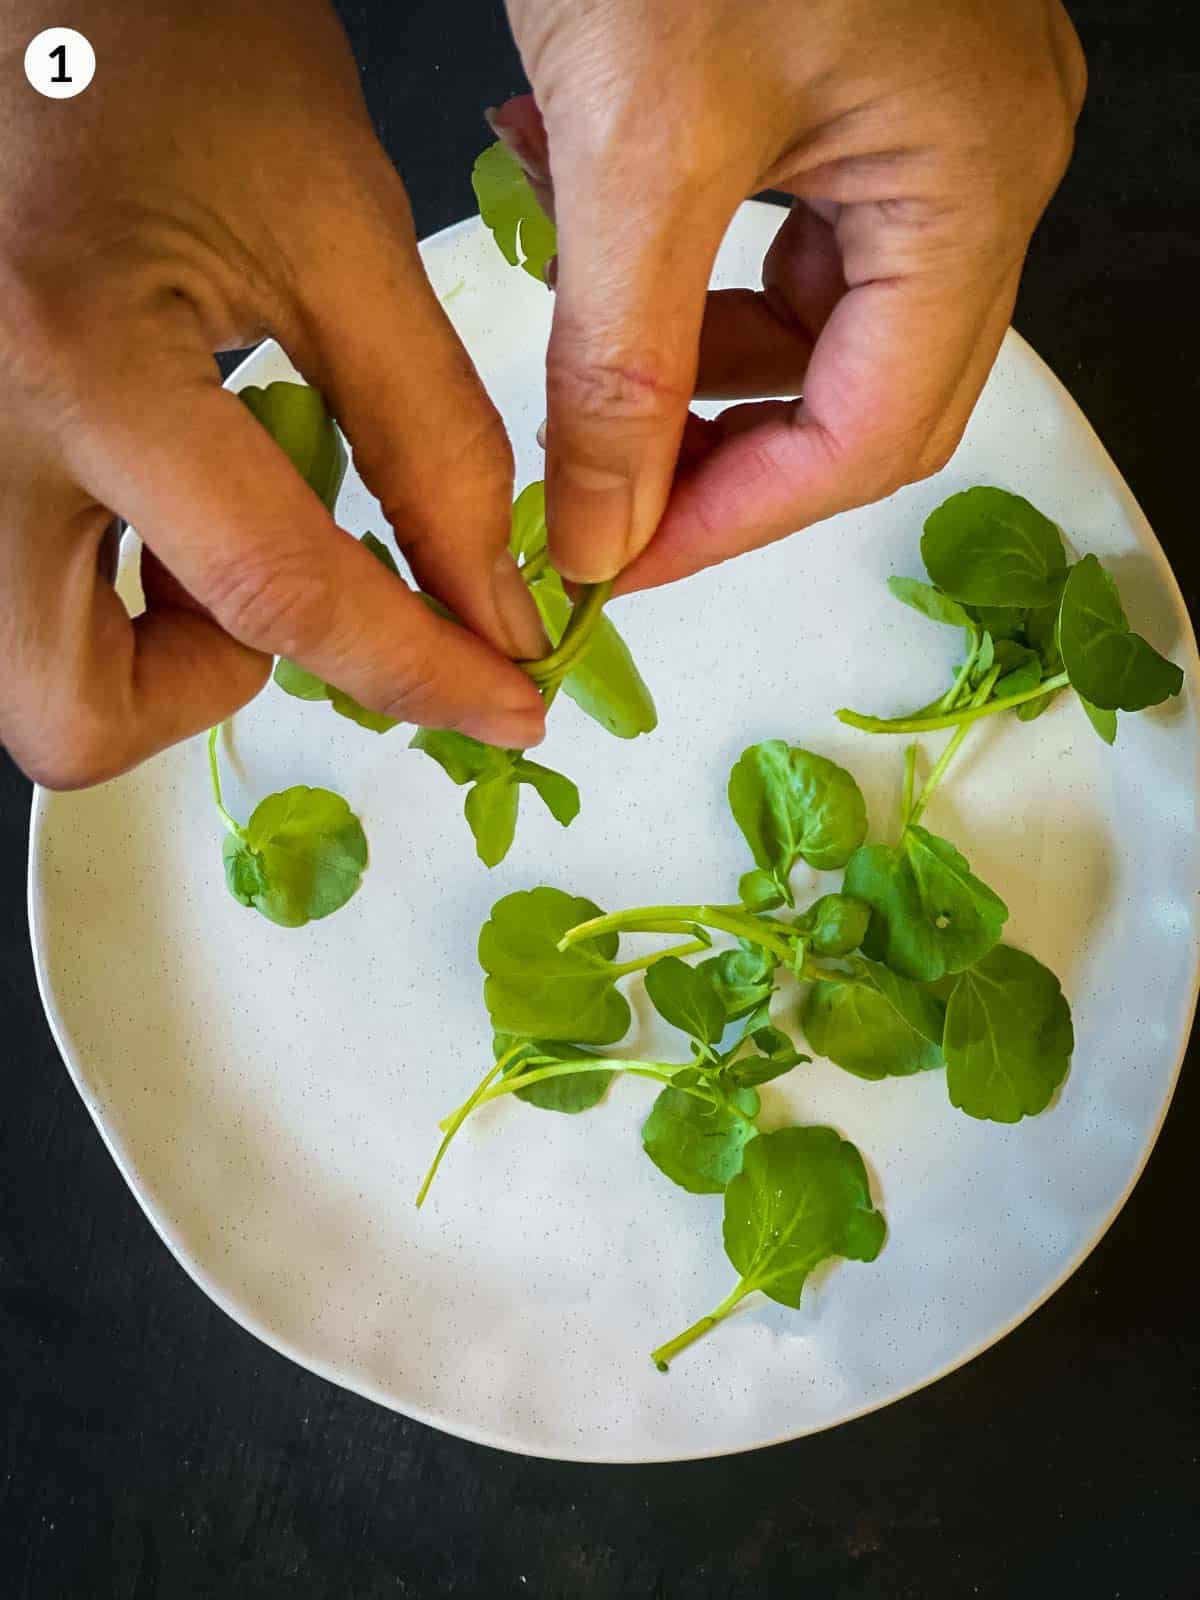 2 hands picking watercress leaves over a white plate